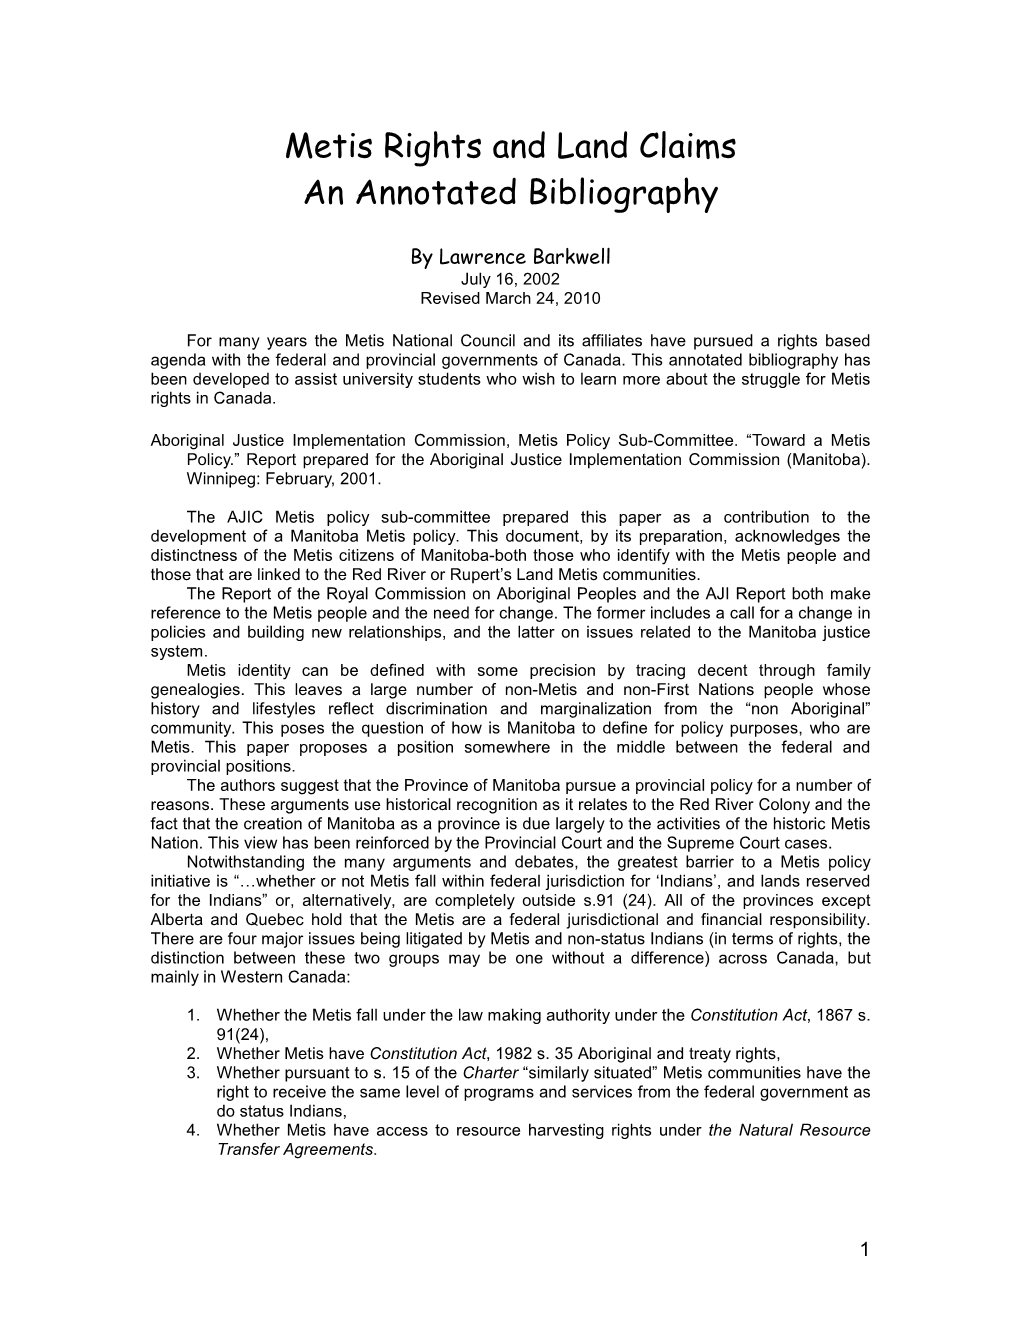 Metis Rights and Land Claims an Annotated Bibliography